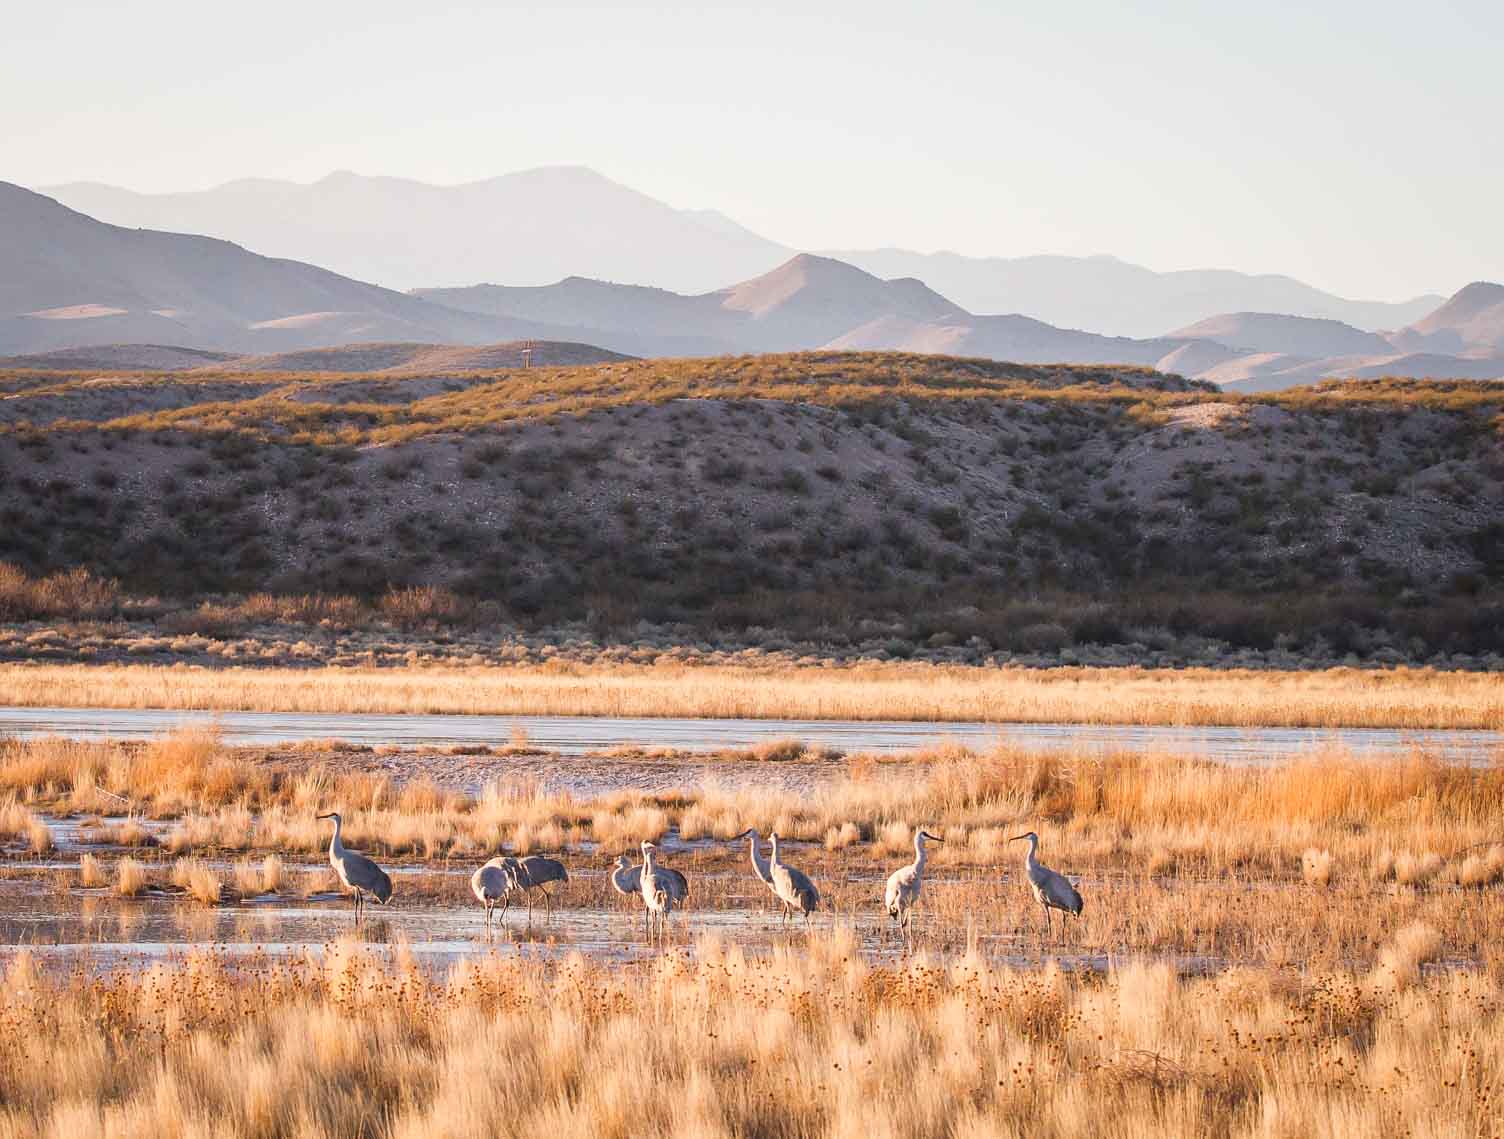 Afternoon, Bosque del Apache National Wildlife Refuge, San Antonio NM, January 4, 2013